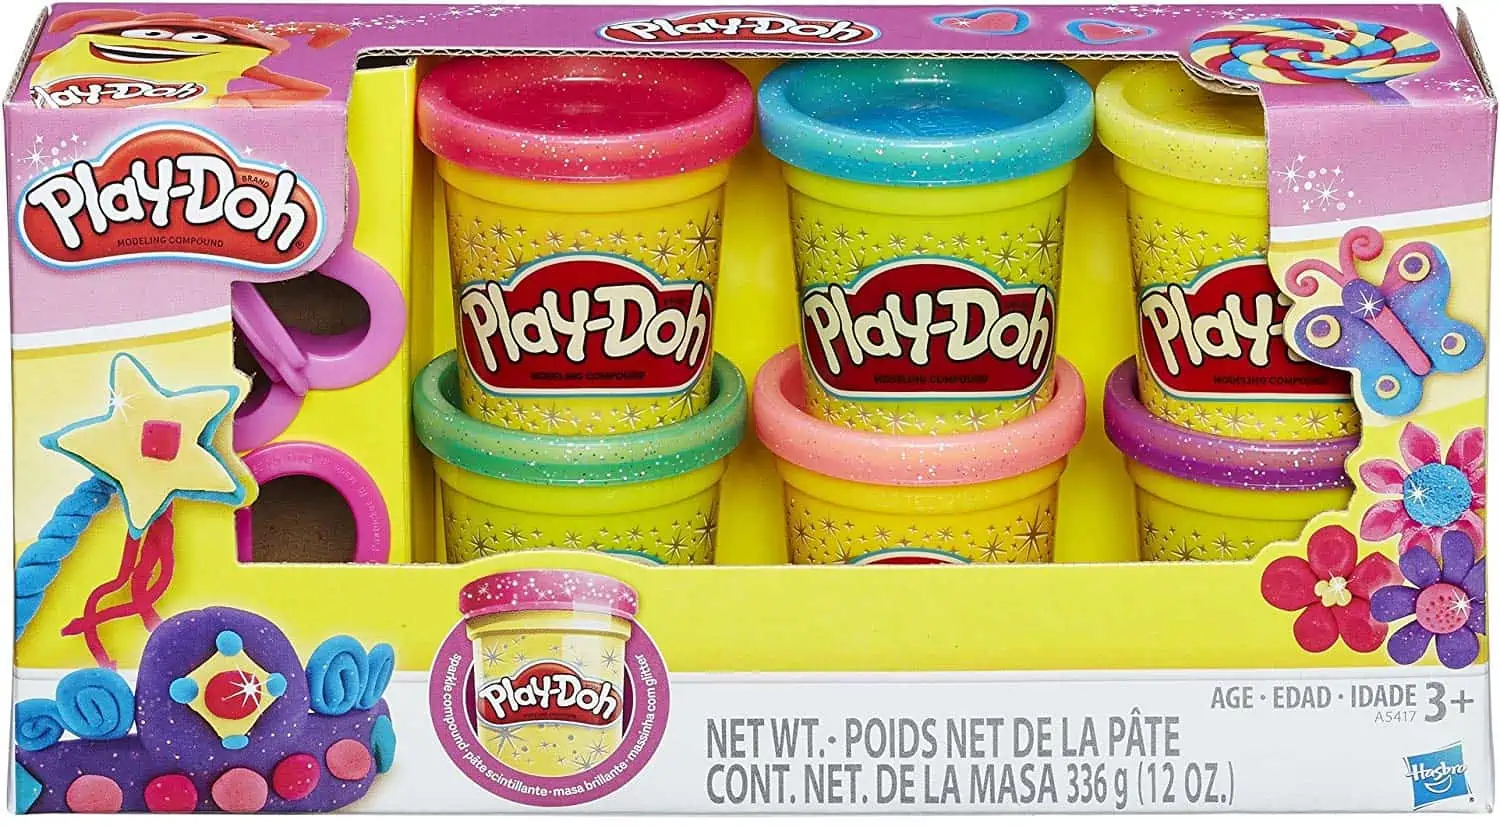 A variety of Play-Doh colors.